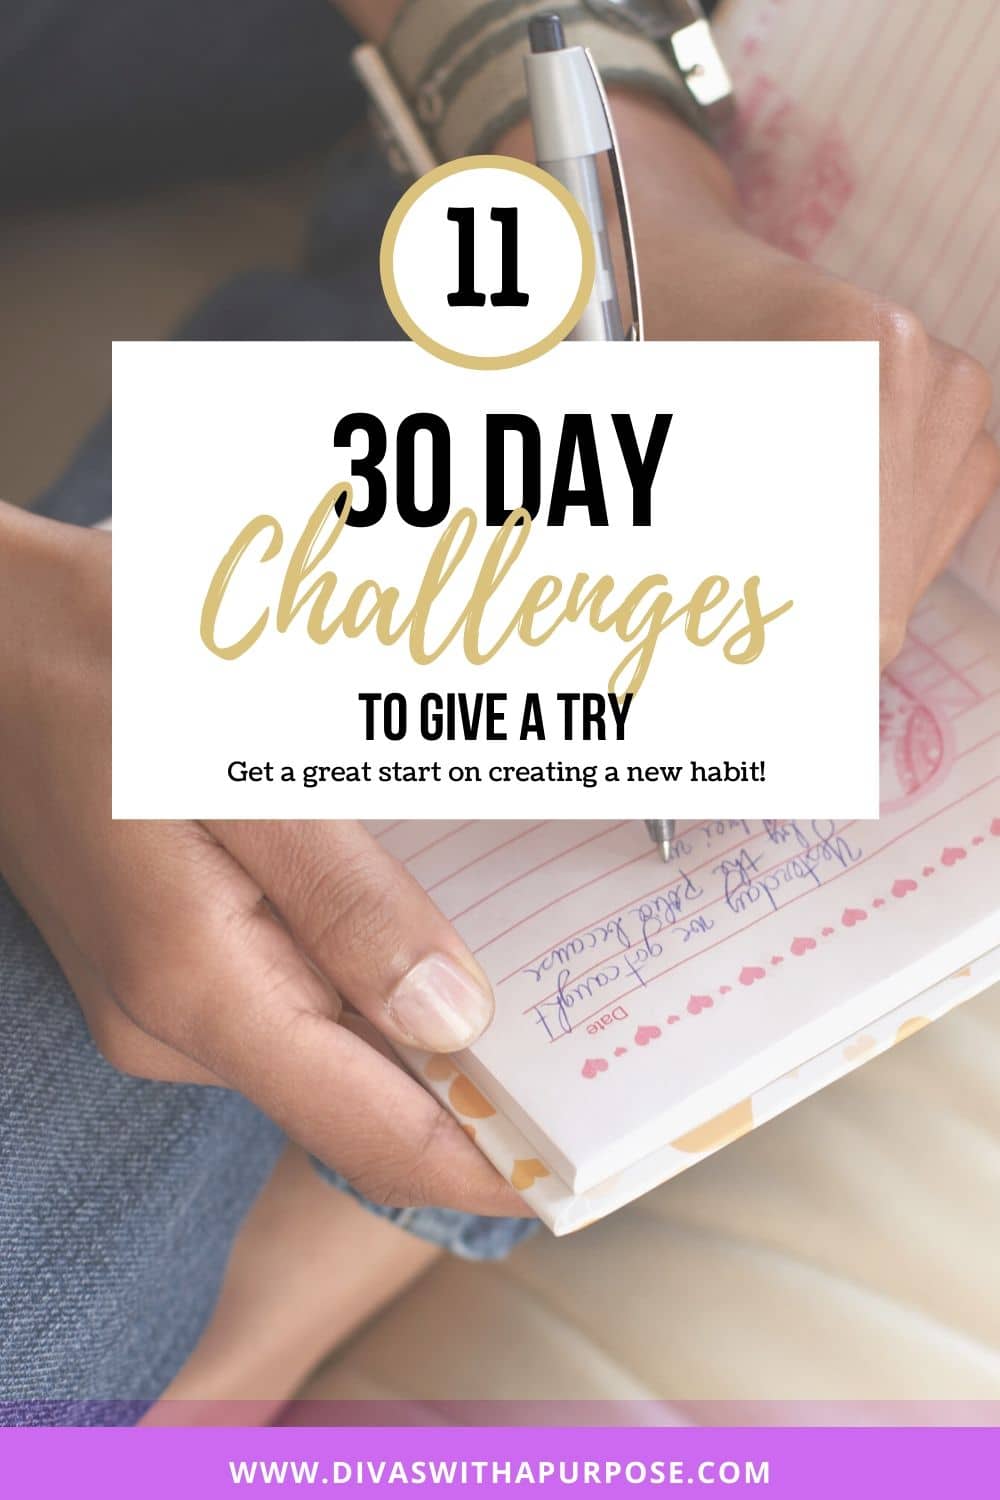 Eleven 30 day challenges to give a try and create new habits